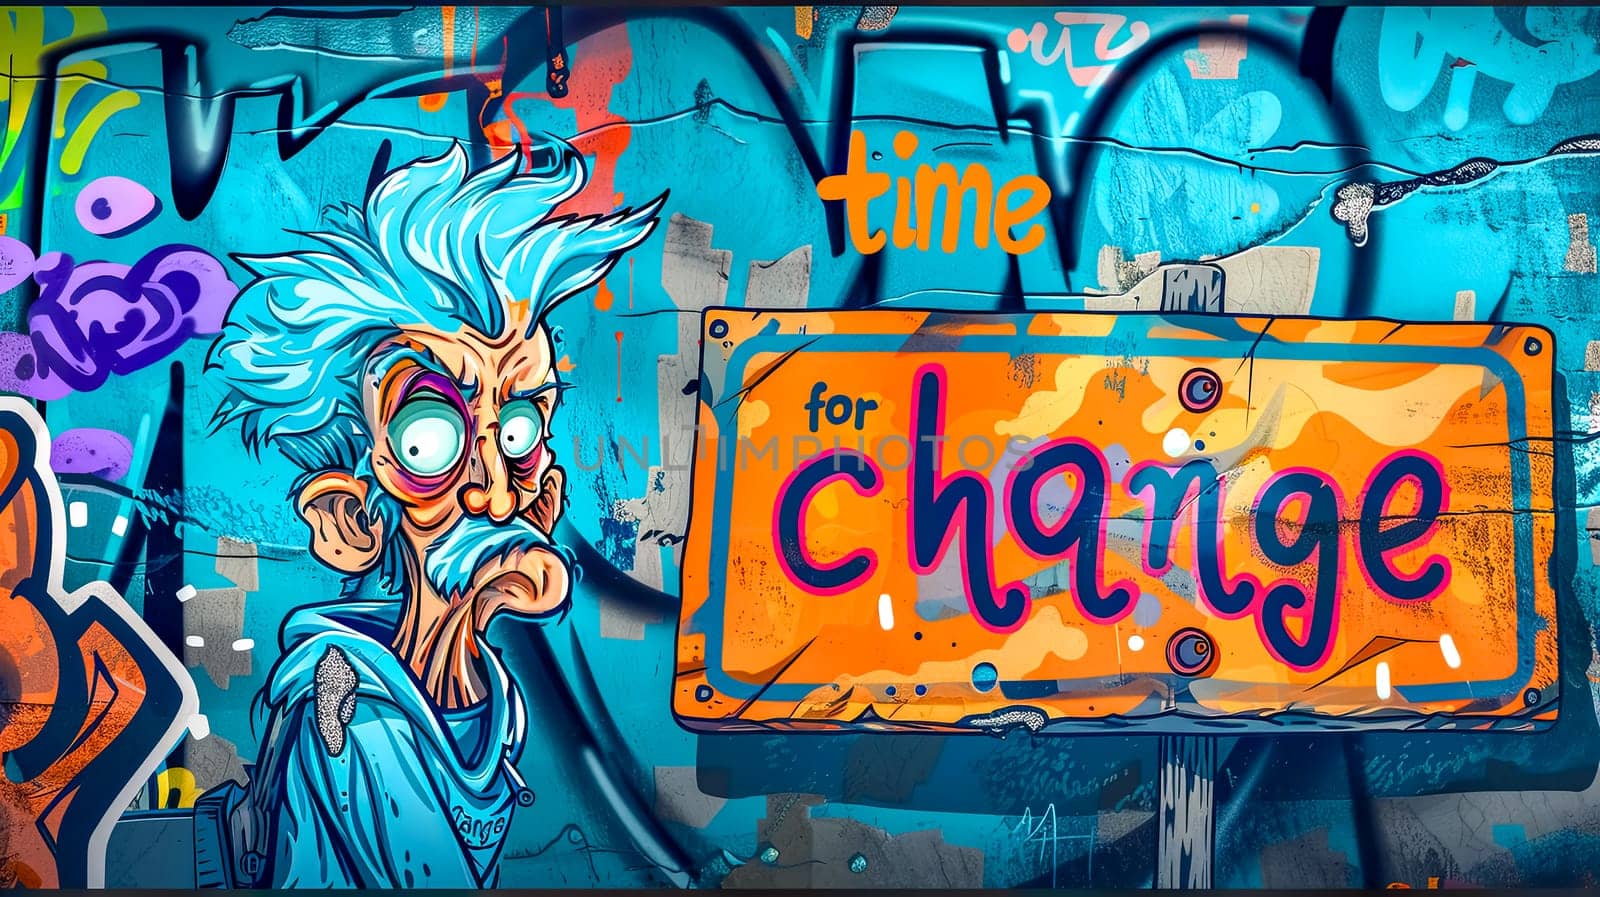 Vibrant street art featuring a quirky scientist with a time for change sign